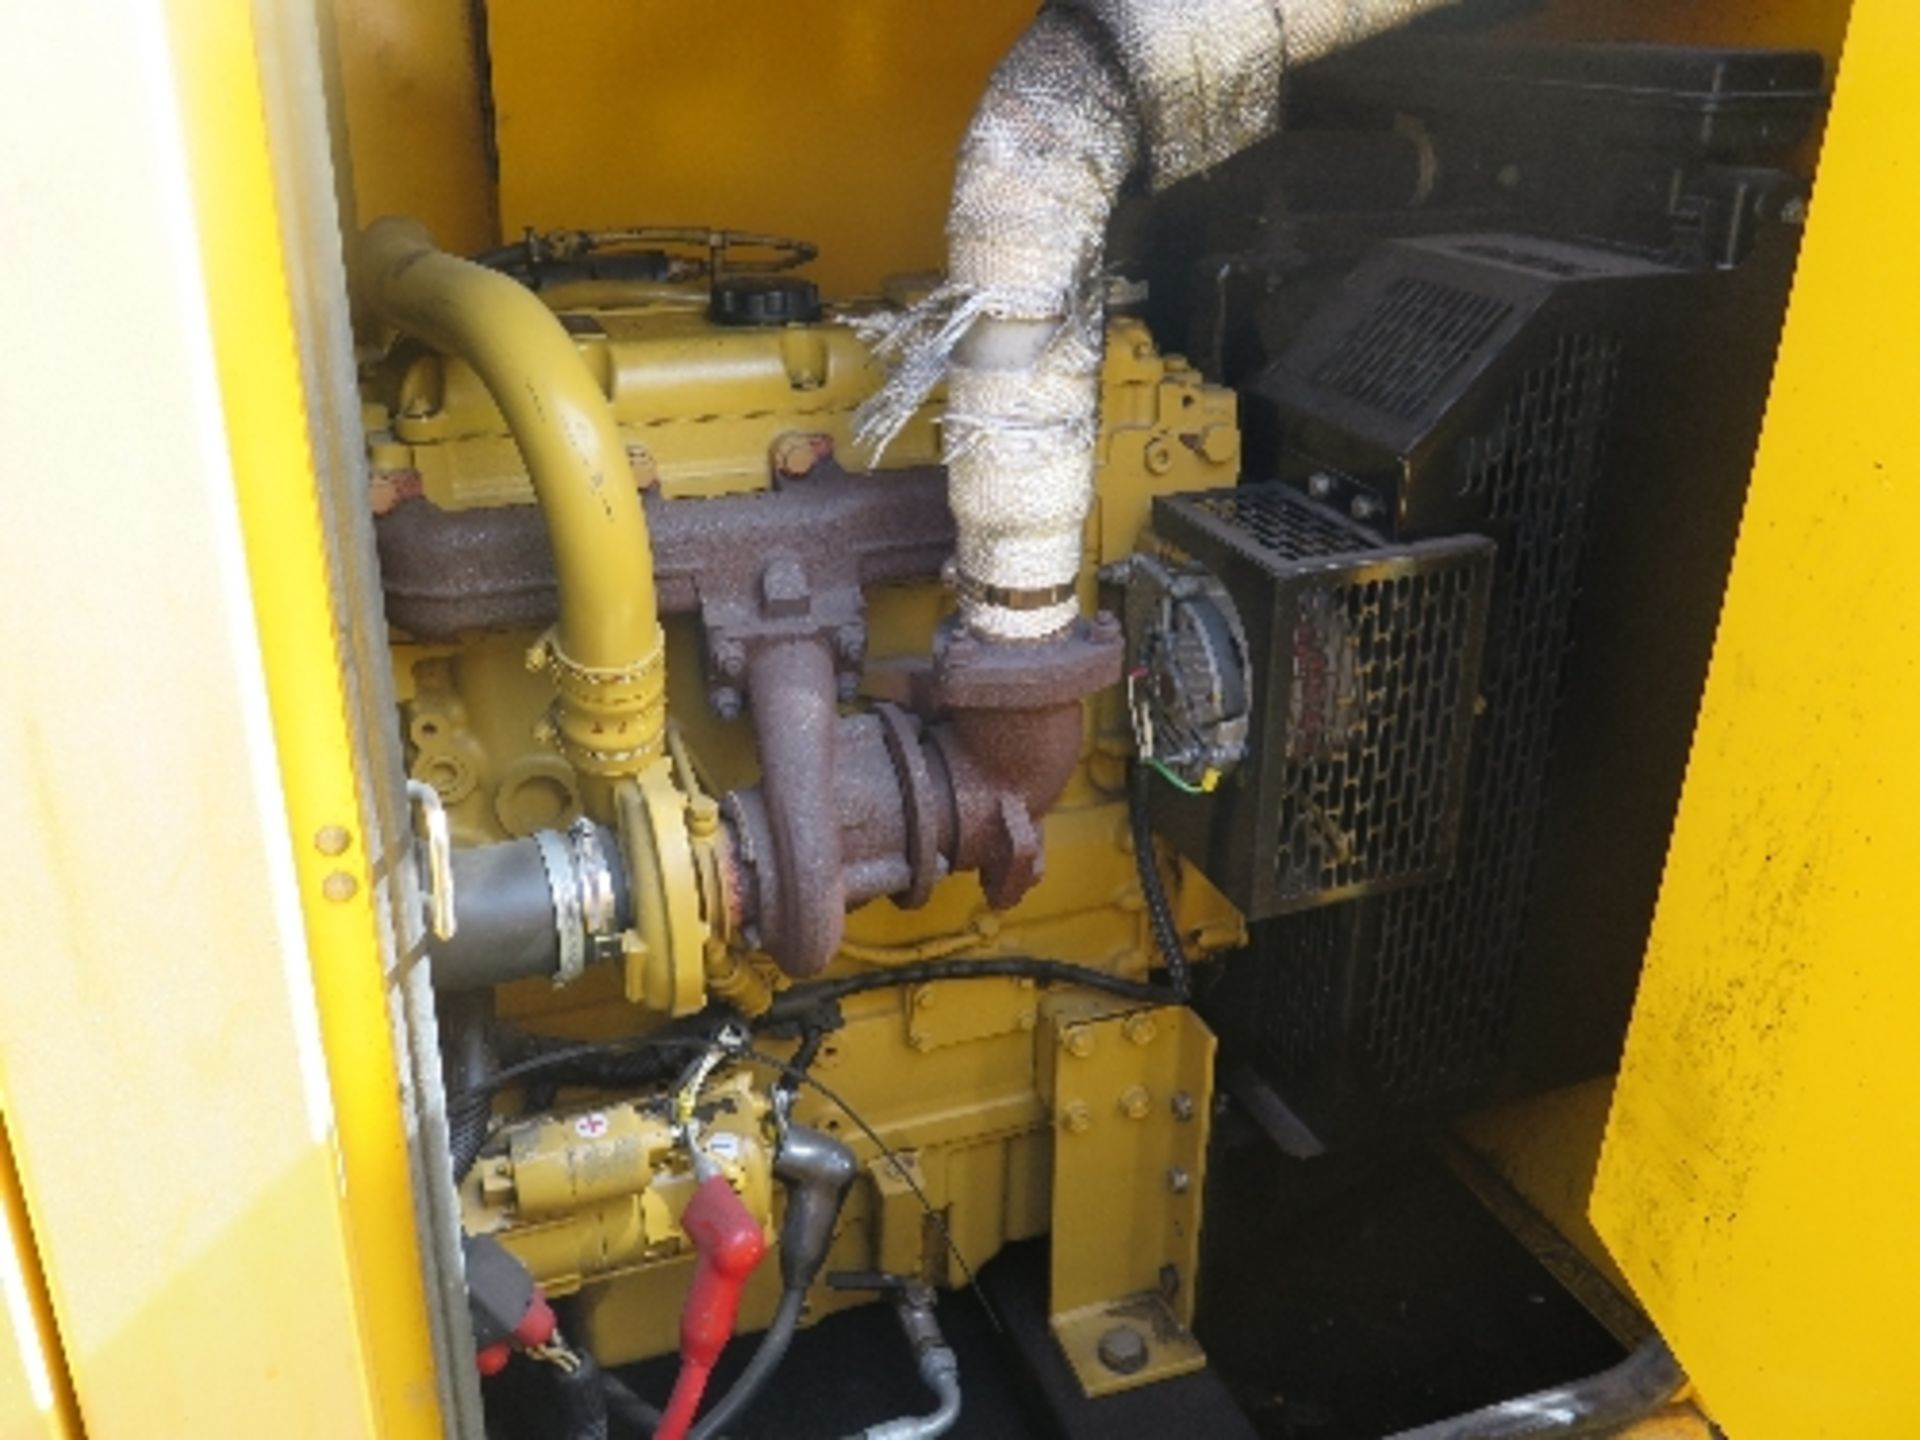 Caterpillar XQE80 generator 15335 hrs 157815
PERKINS - RUNS AND MAKES POWER
ALL LOTS are SOLD AS - Image 5 of 6